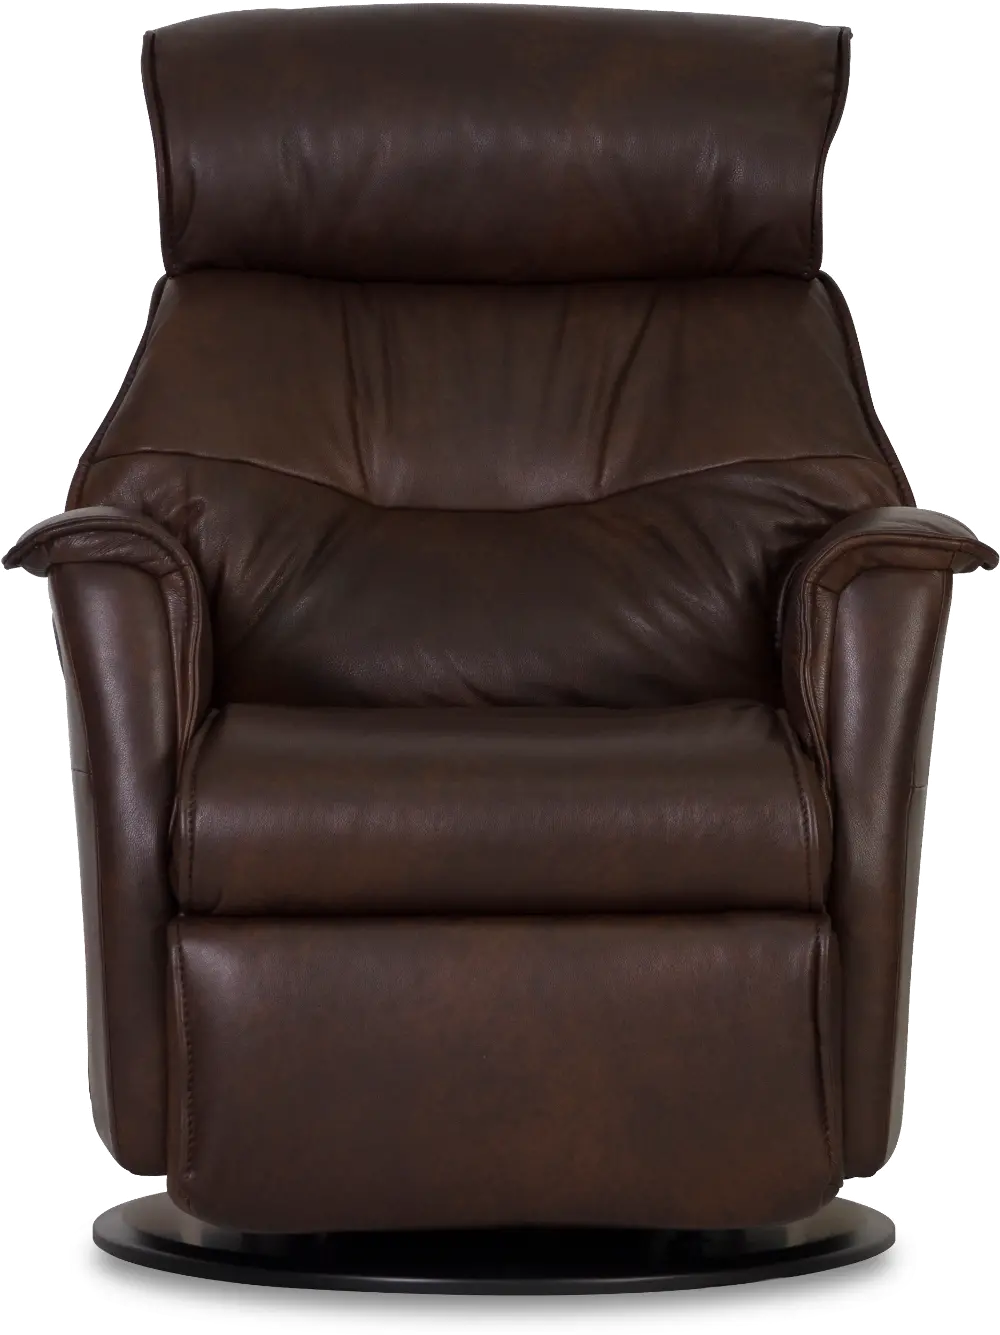 Truffle Brown Leather Compact Swivel Glider Manual Recliner - Captain-1